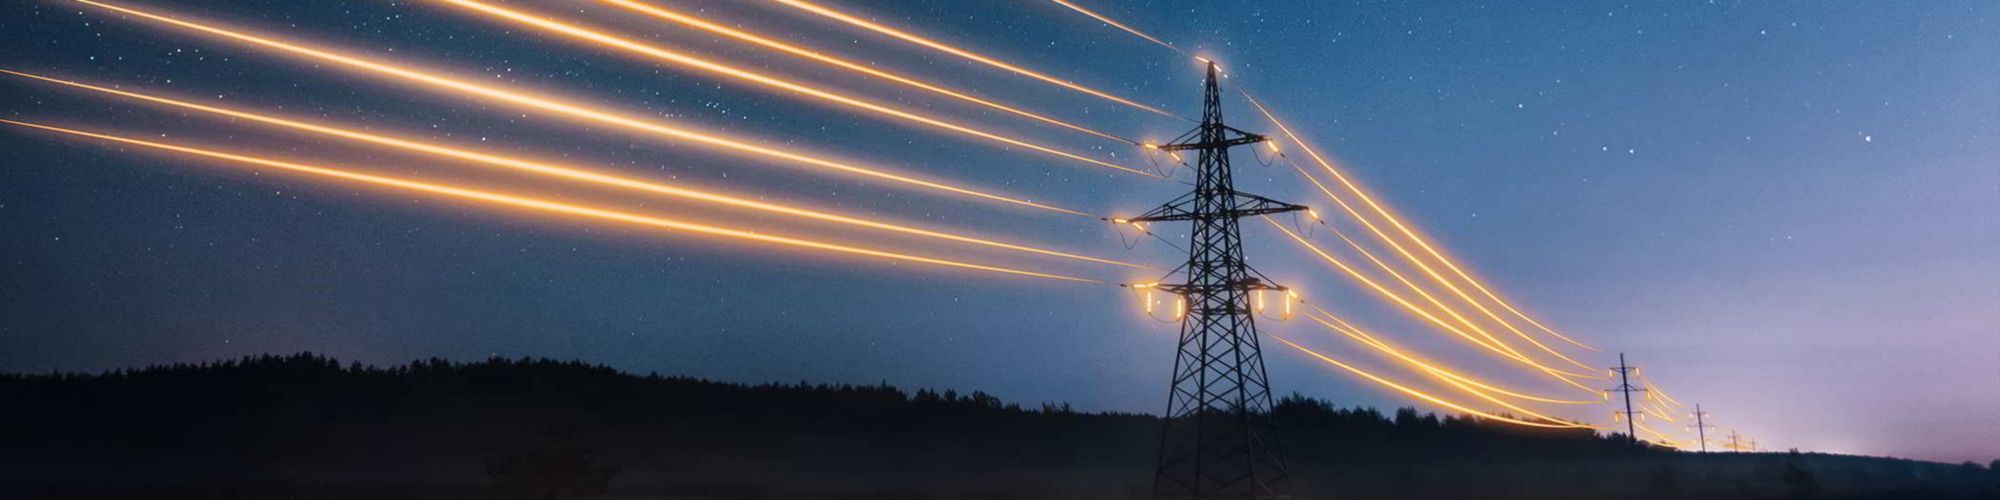 Neon lines of electricity shooting out of pylon at night